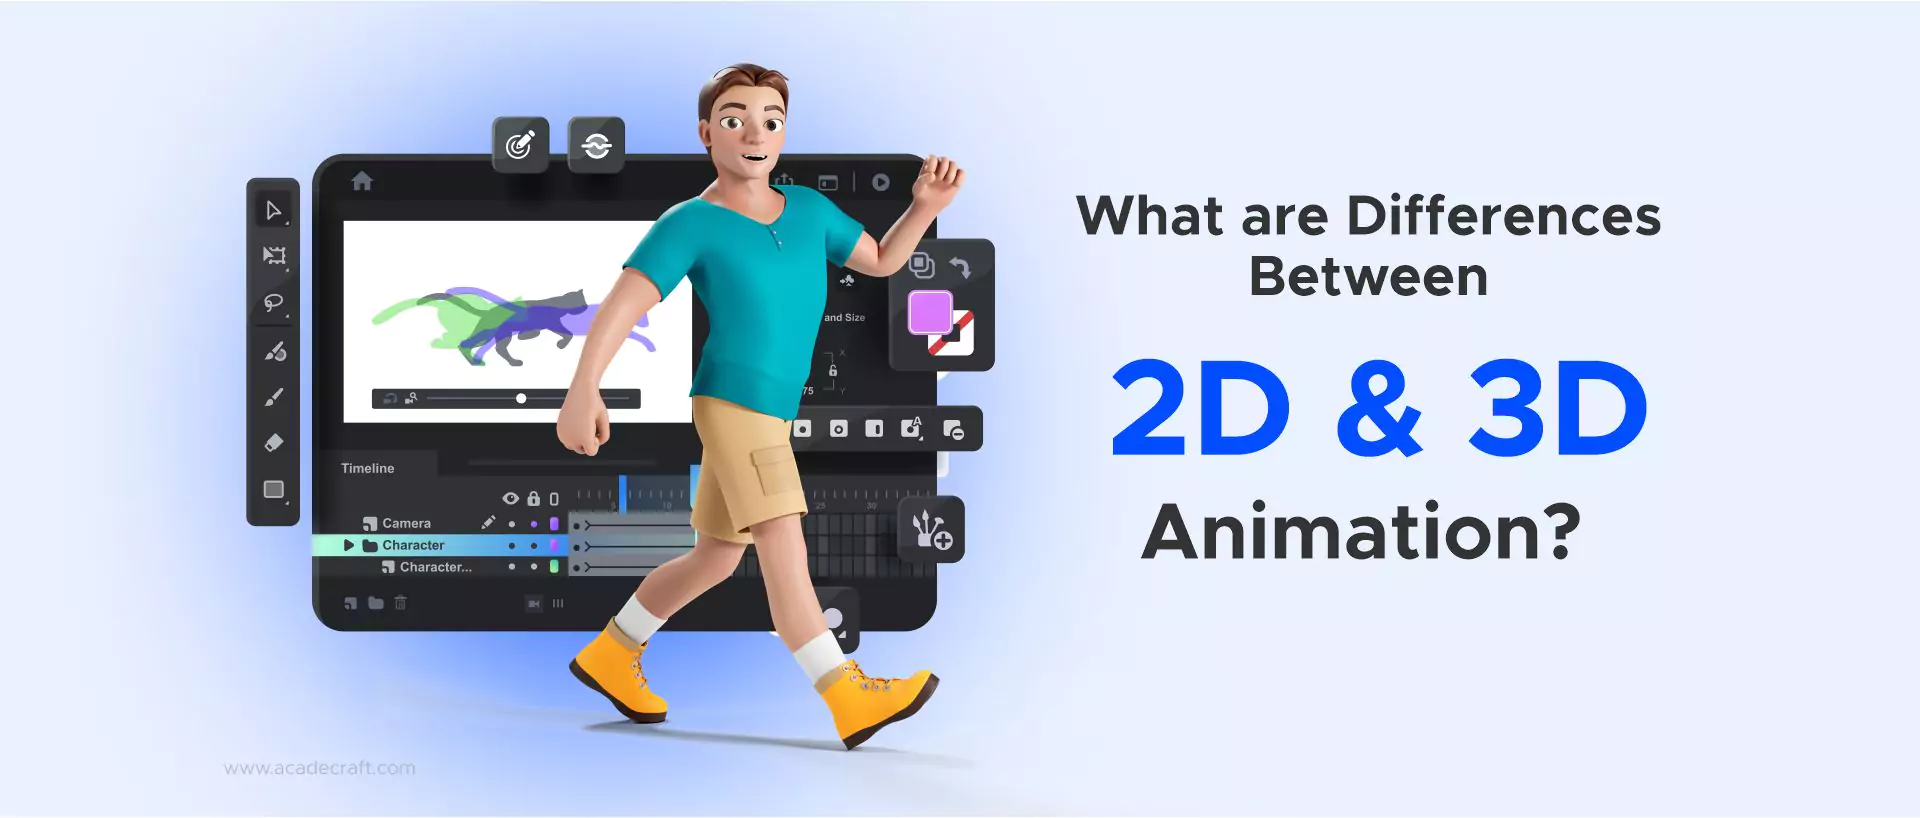 What are Differences Between 2D and 3D Animation